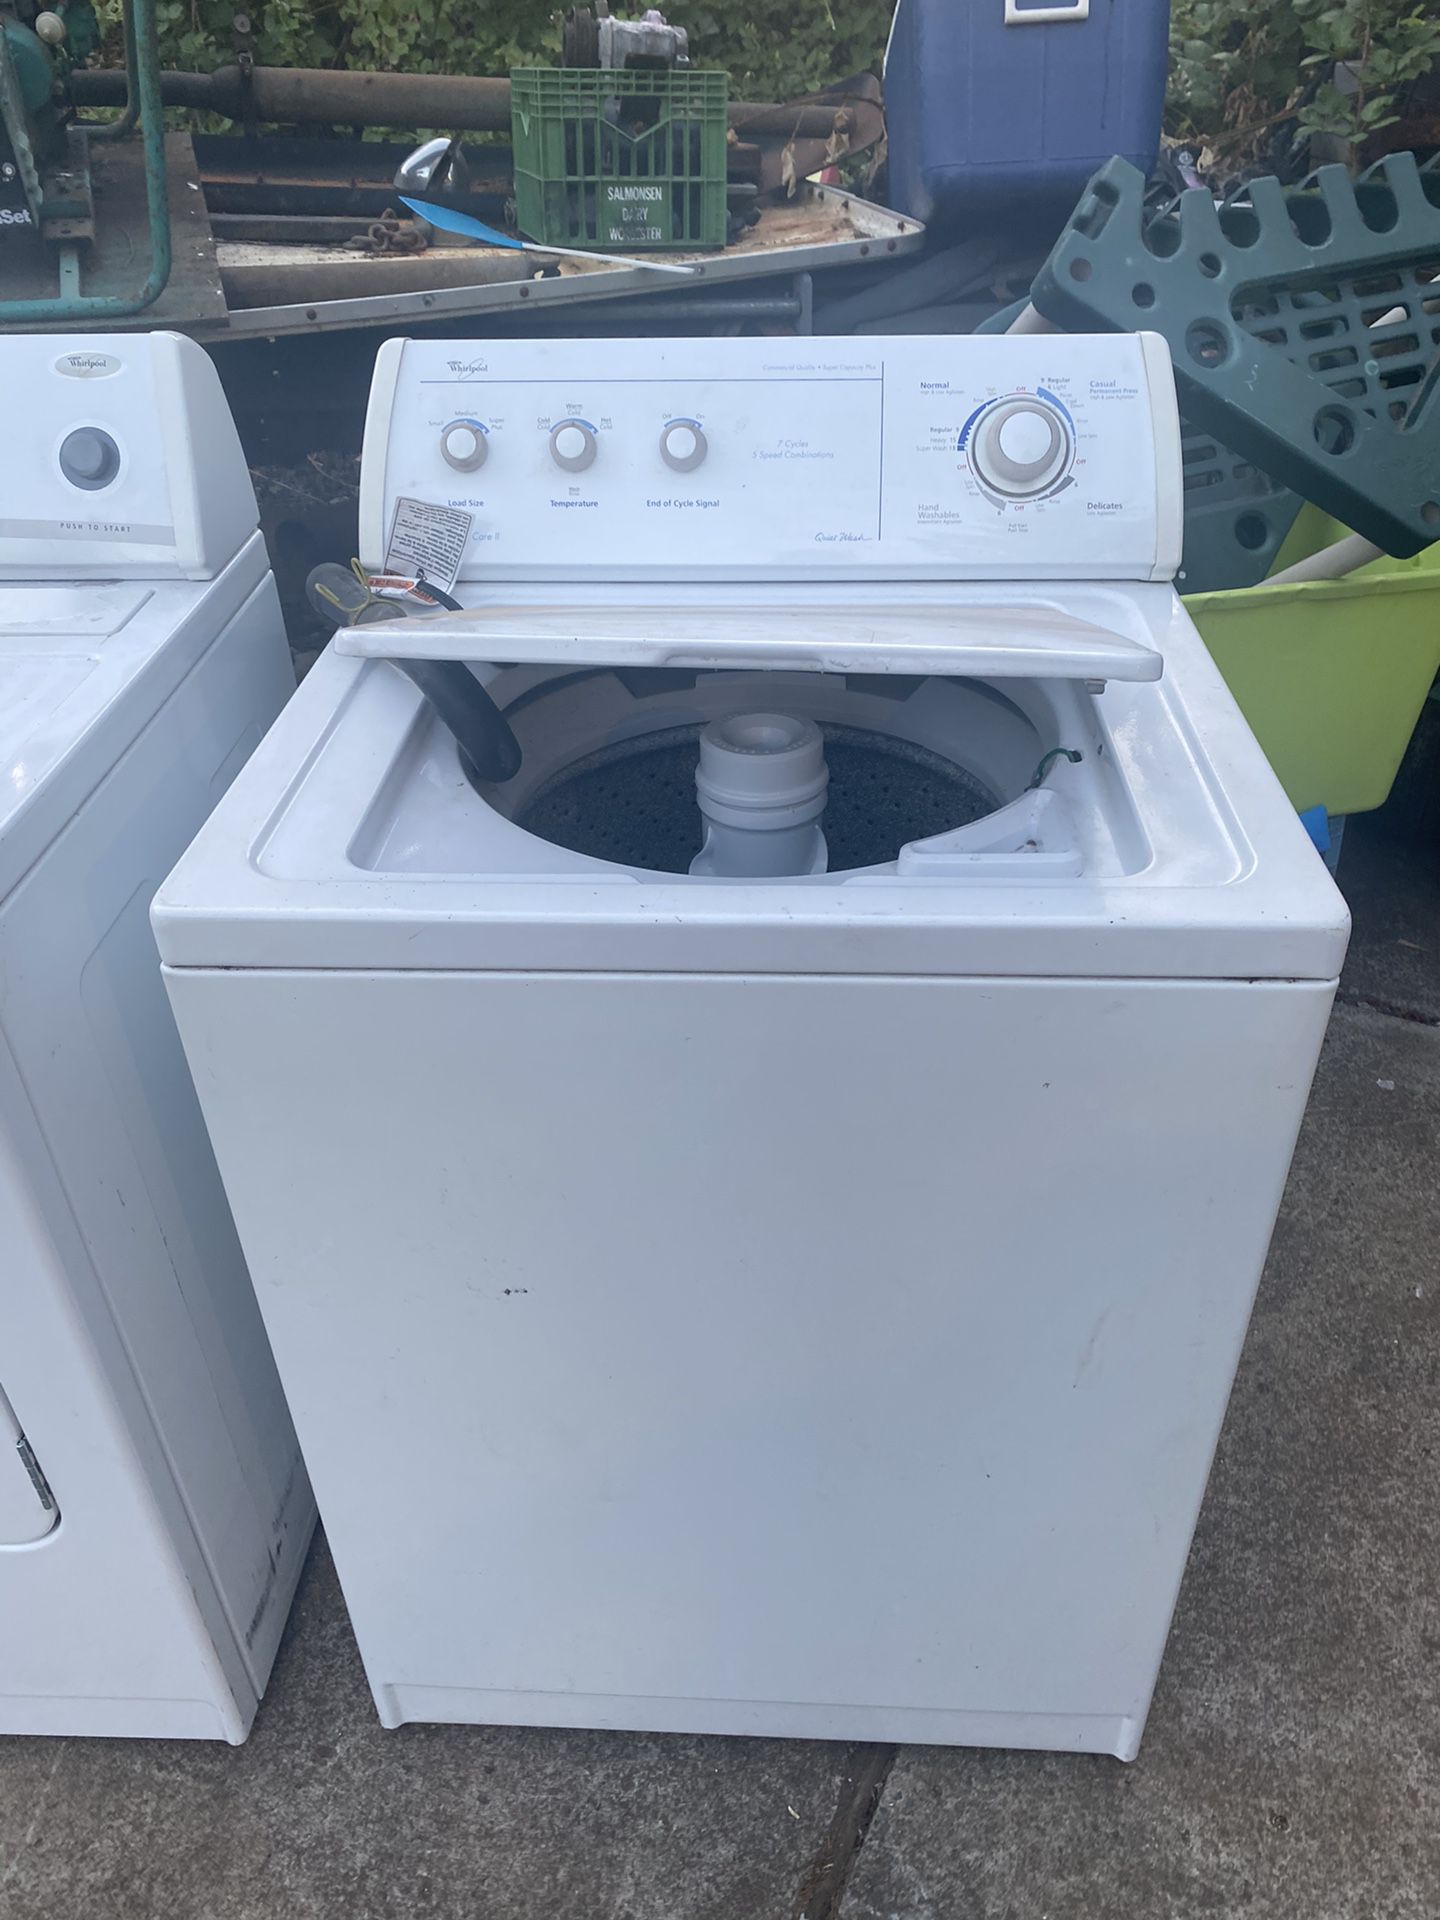 Whirlpool washer/dryer- works great - just upgraded to double capacity